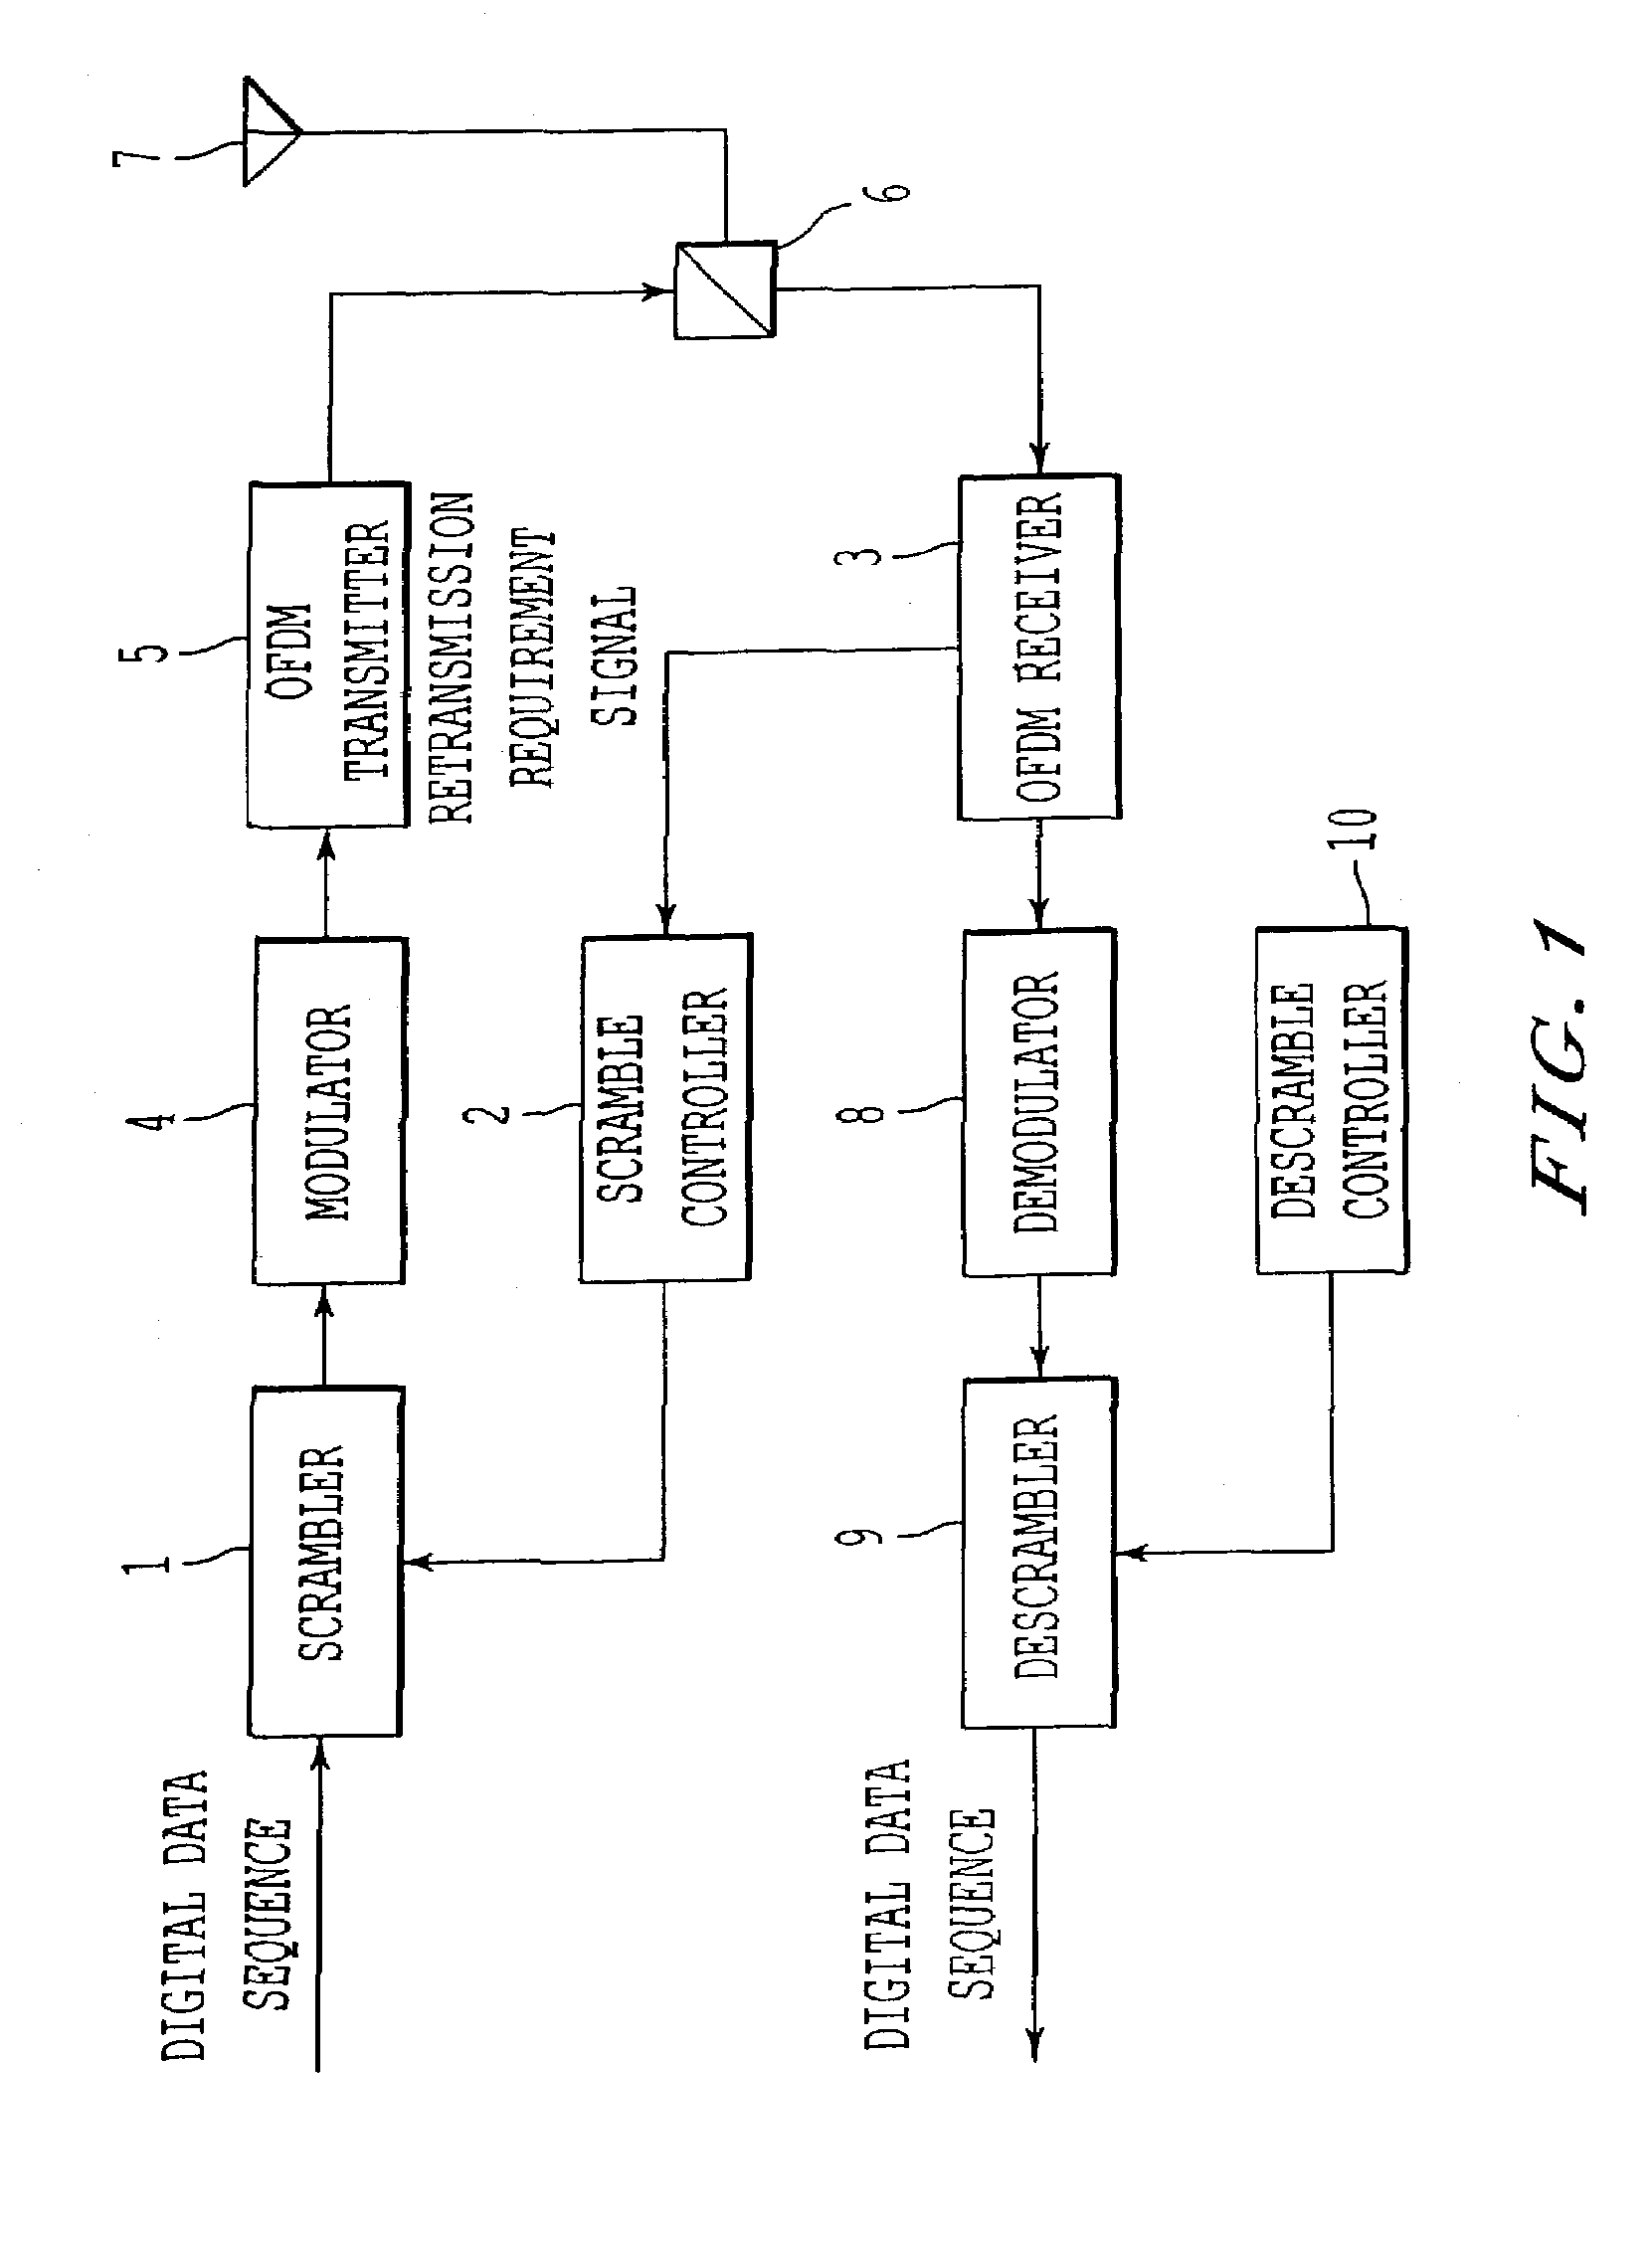 Retransmission control method and apparatus for use in OFDM radio communication system